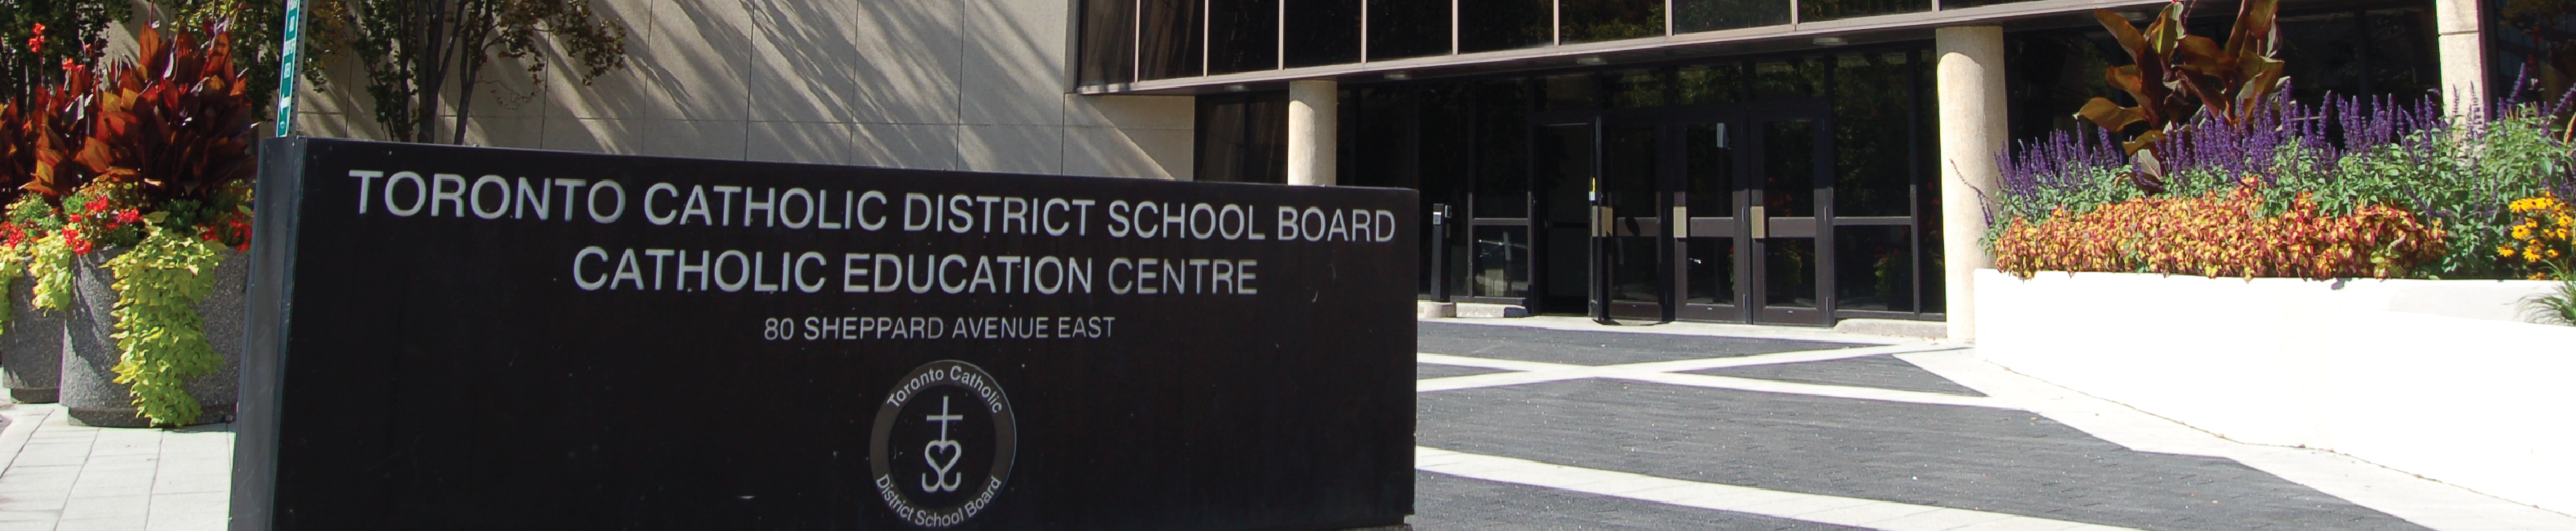 Building sign in front of building for Toronto Catholic District School Board Catholic Education Centre.